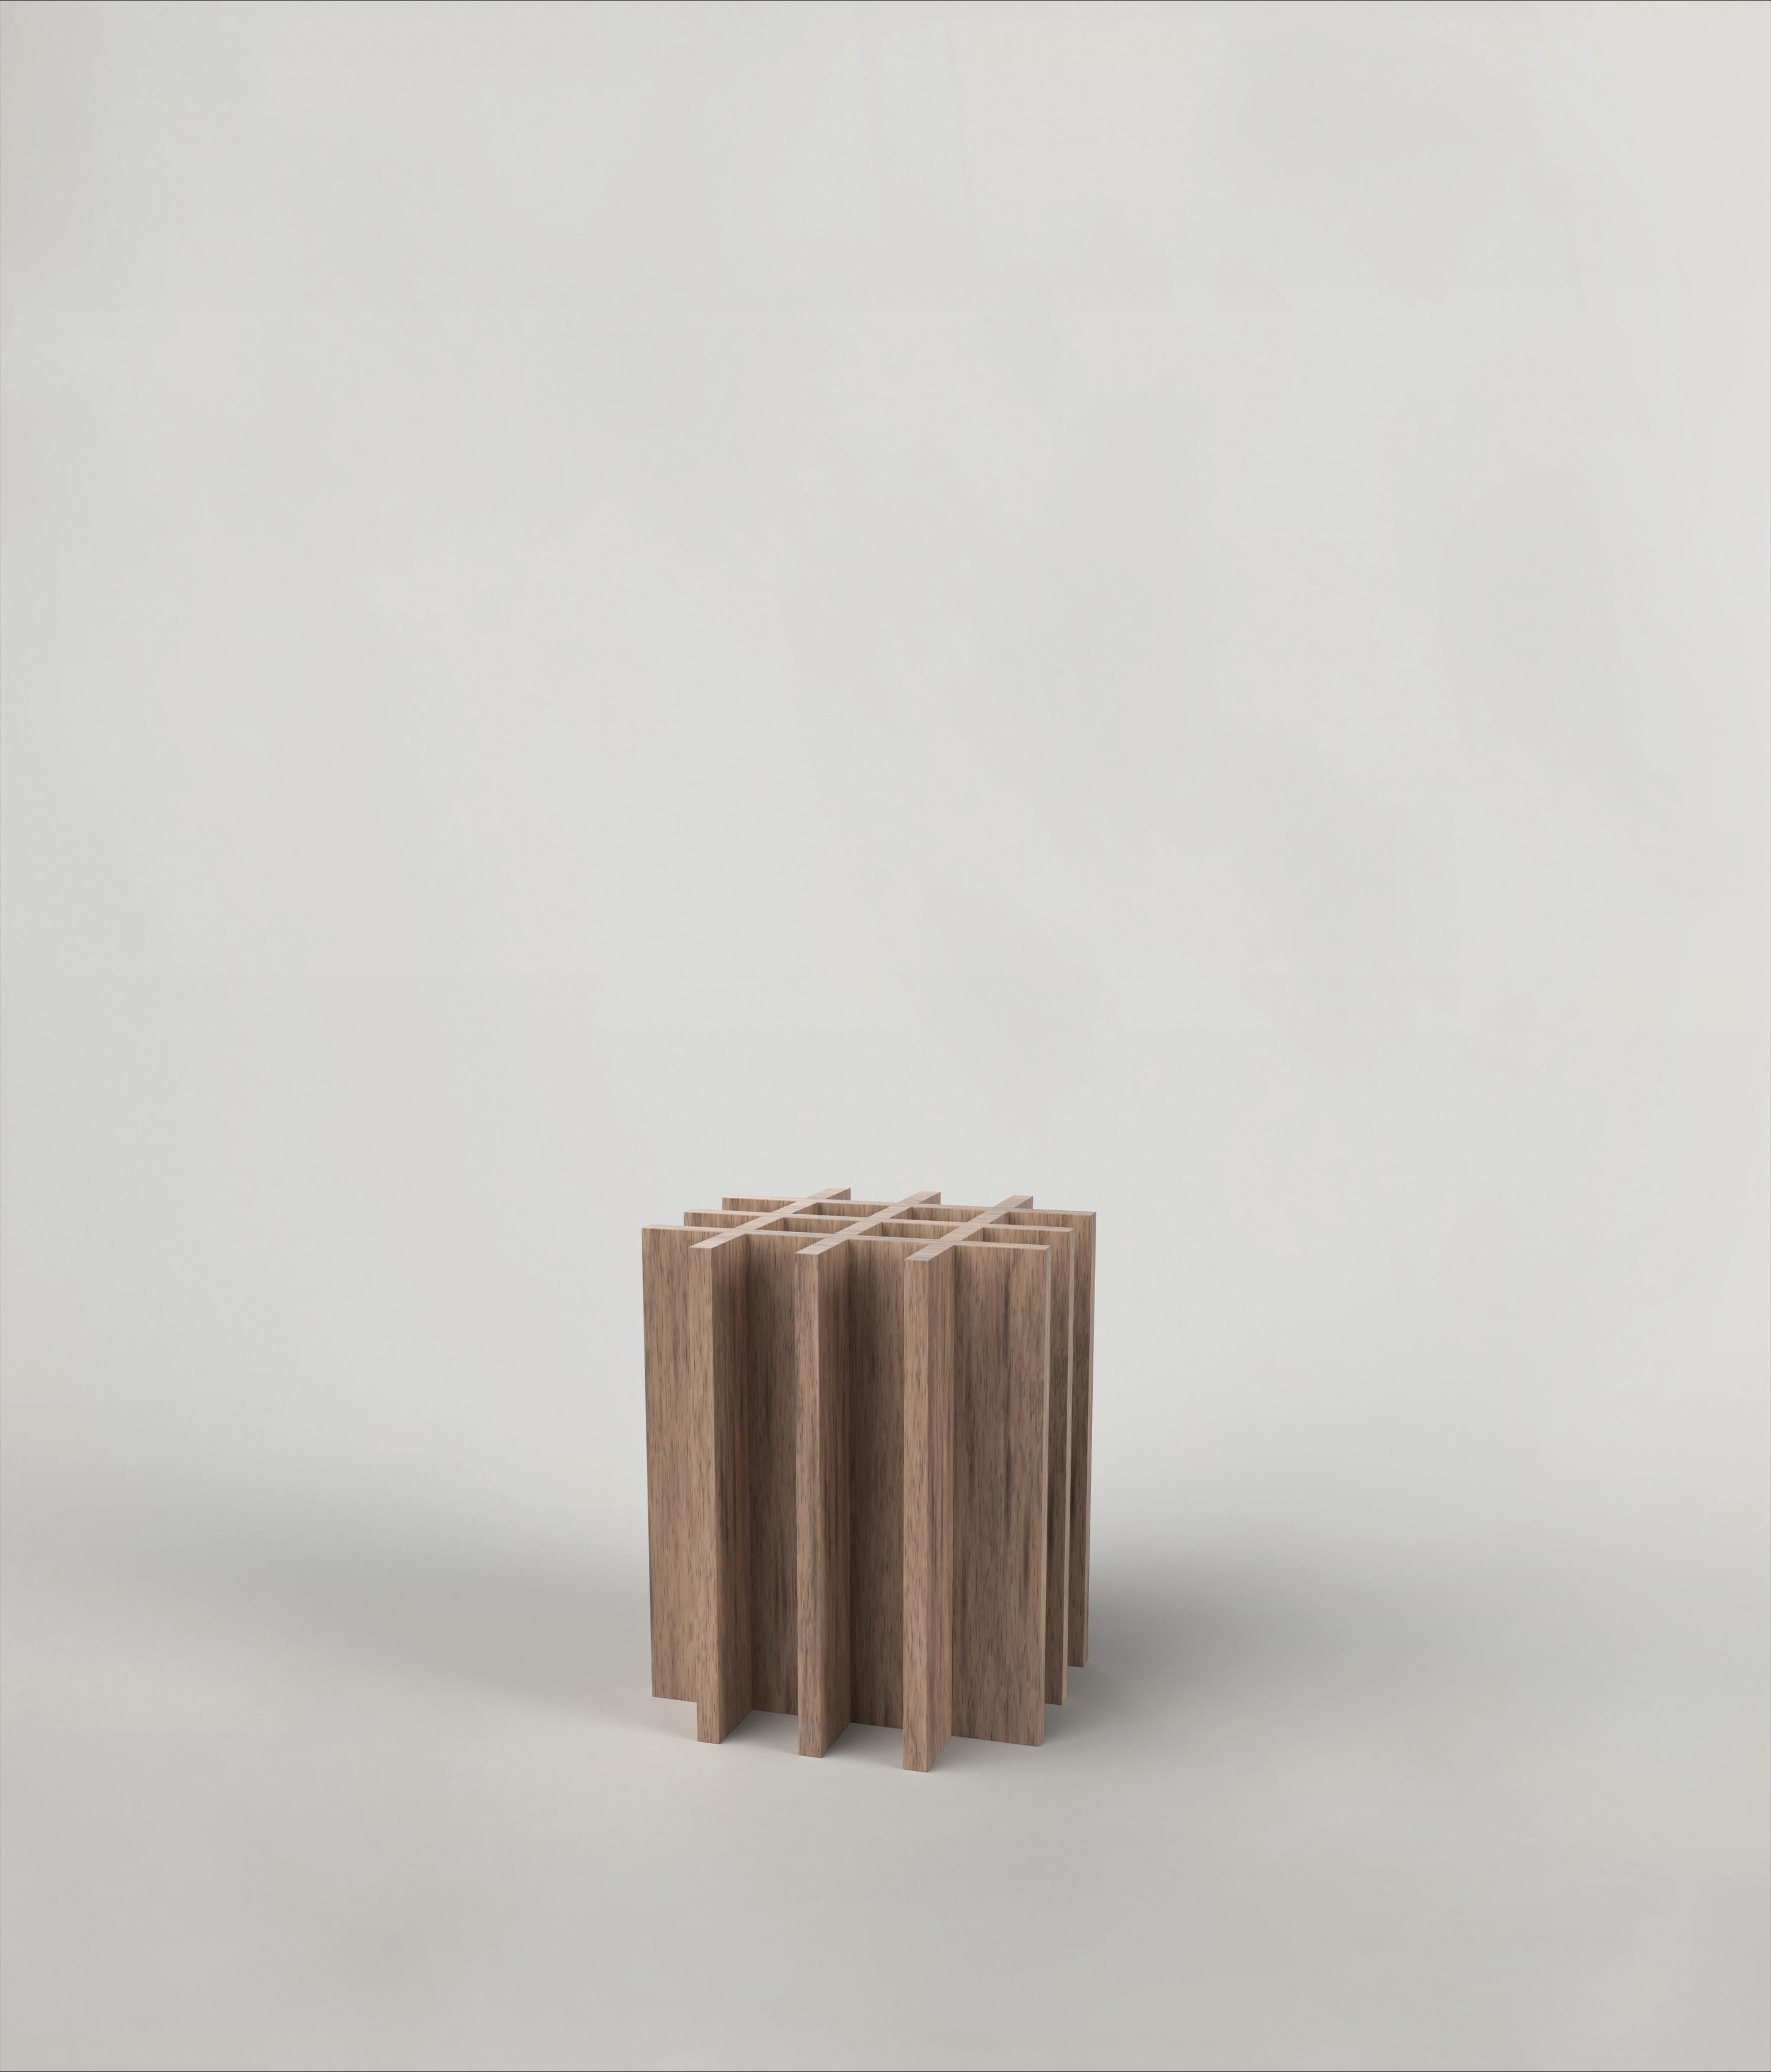 Arca V1 stool by Edizione Limitata
Limited Edition of 150. Signed and numbered.
Dimensions: D 35 x W 35 x H 42 cm
Materials: Solid ash wood

These contemporary solid wood pieces are manufactured by the excellence of Italian craftmanship. It is part